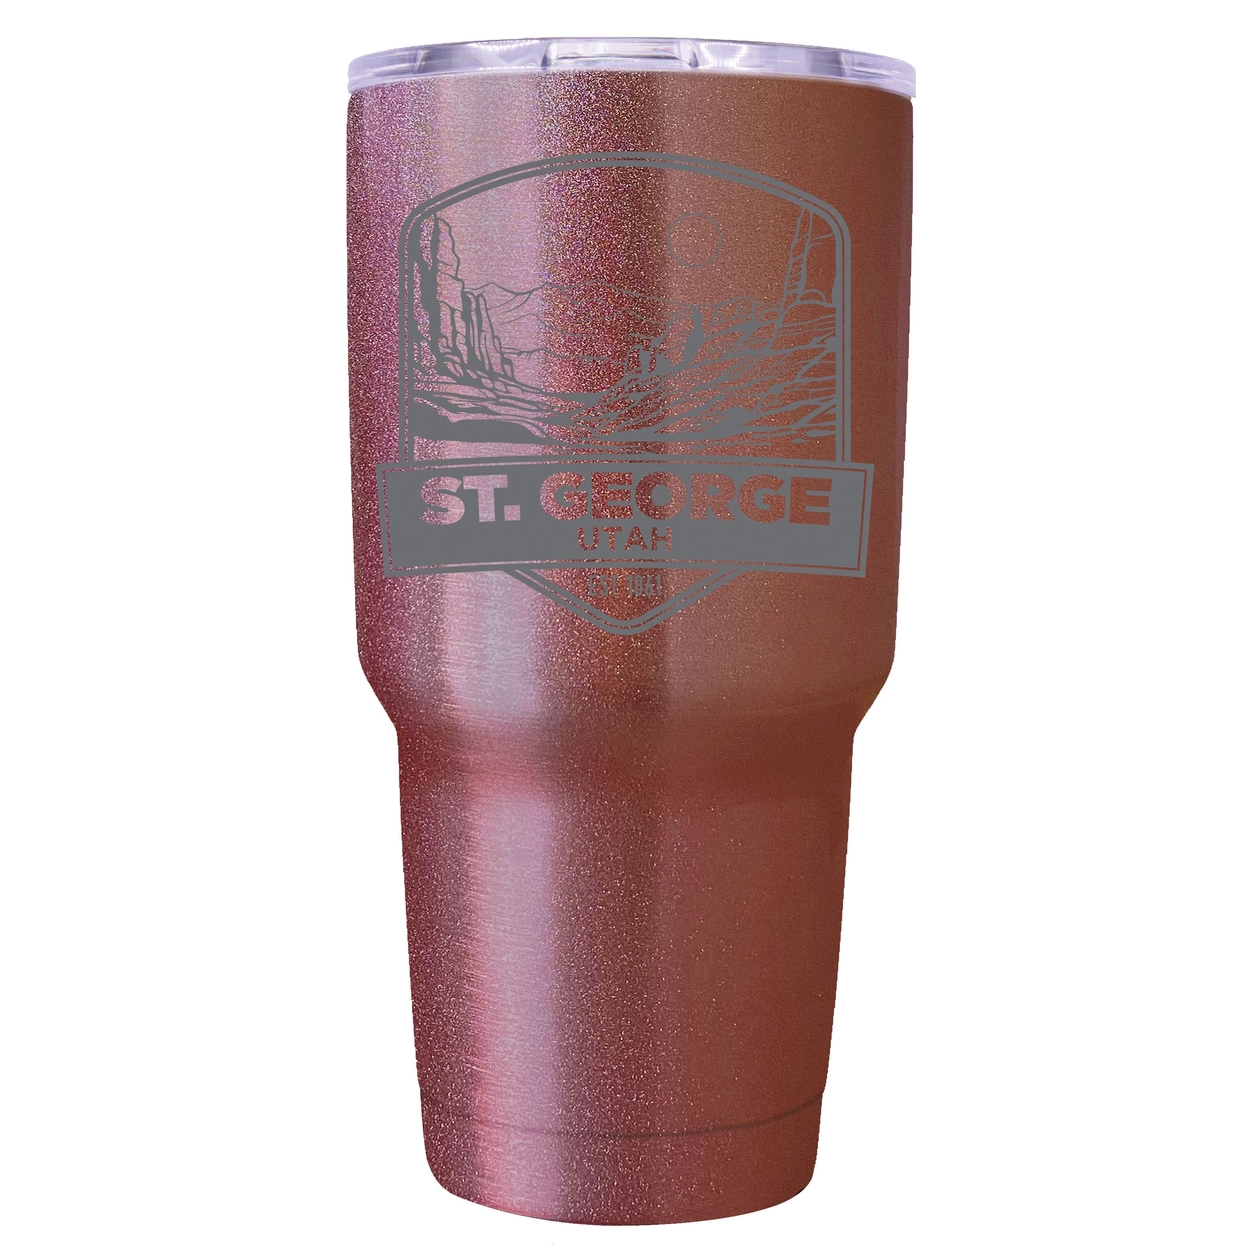 St. George Utah Souvenir 24 Oz Engraved Insulated Stainless Steel Tumbler - Navy,,4-Pack